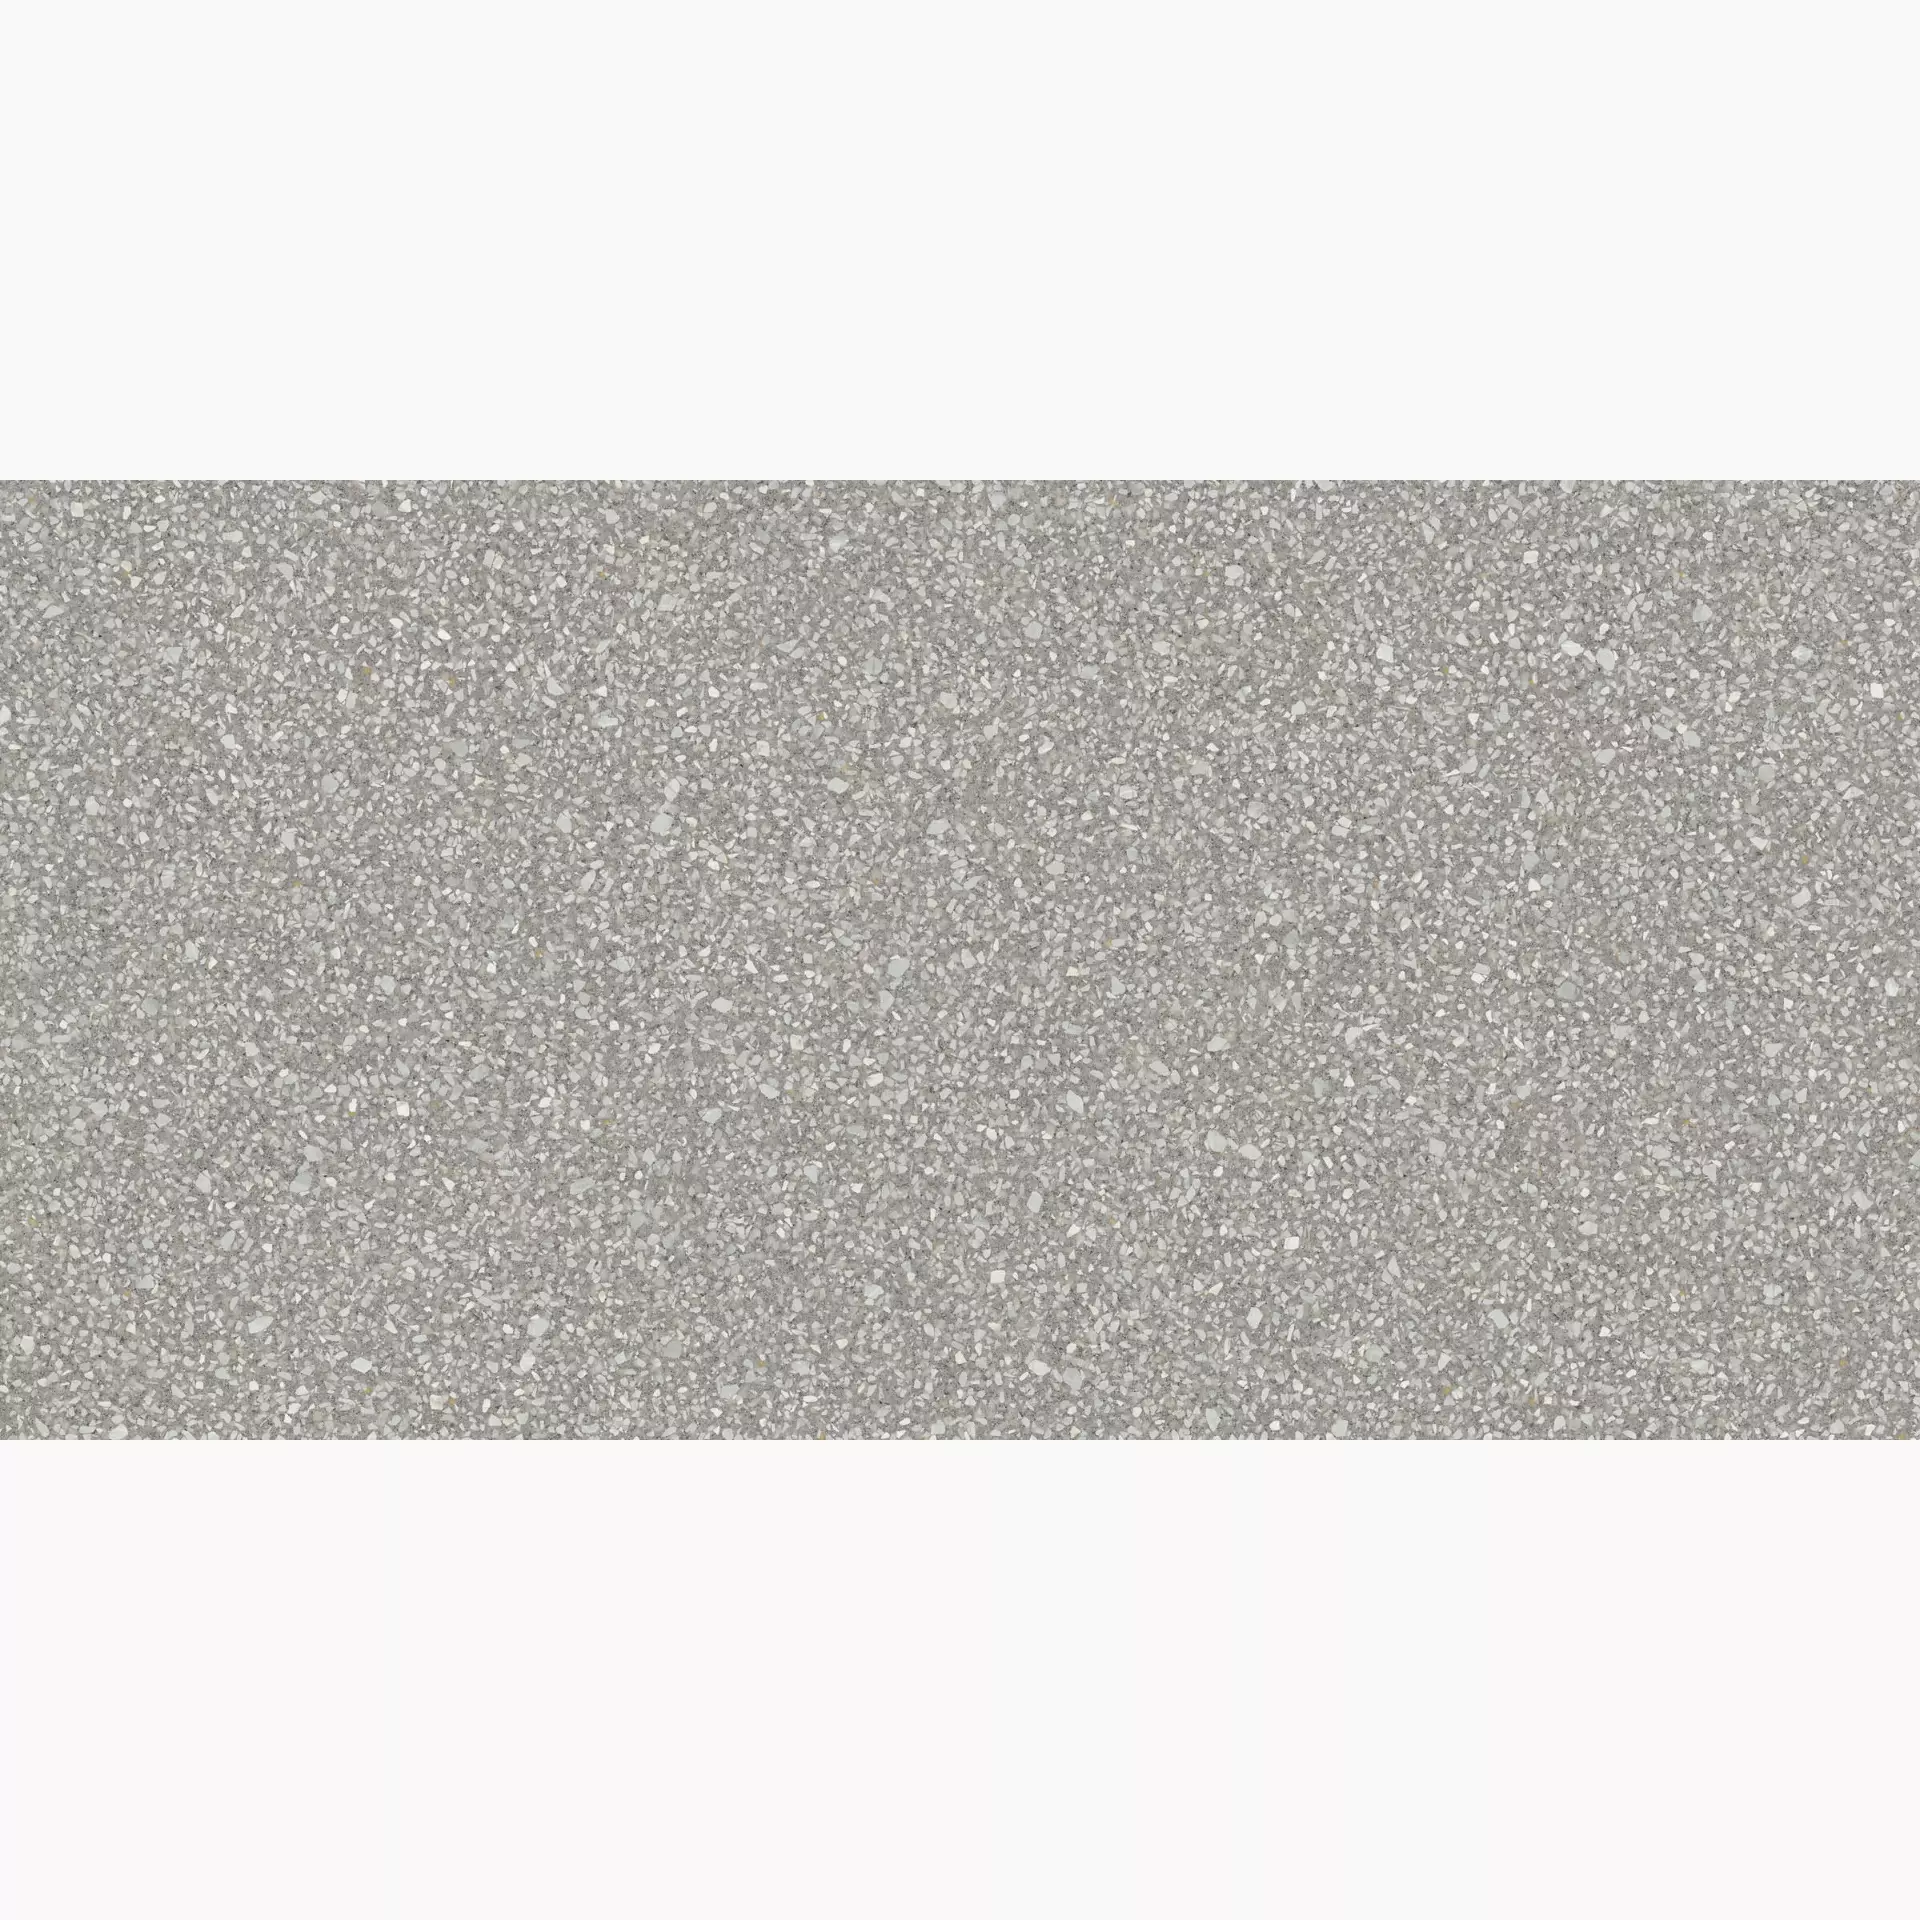 ABK Blend Dots Grey Naturale PF60006702 60x120cm rectified 8,5mm